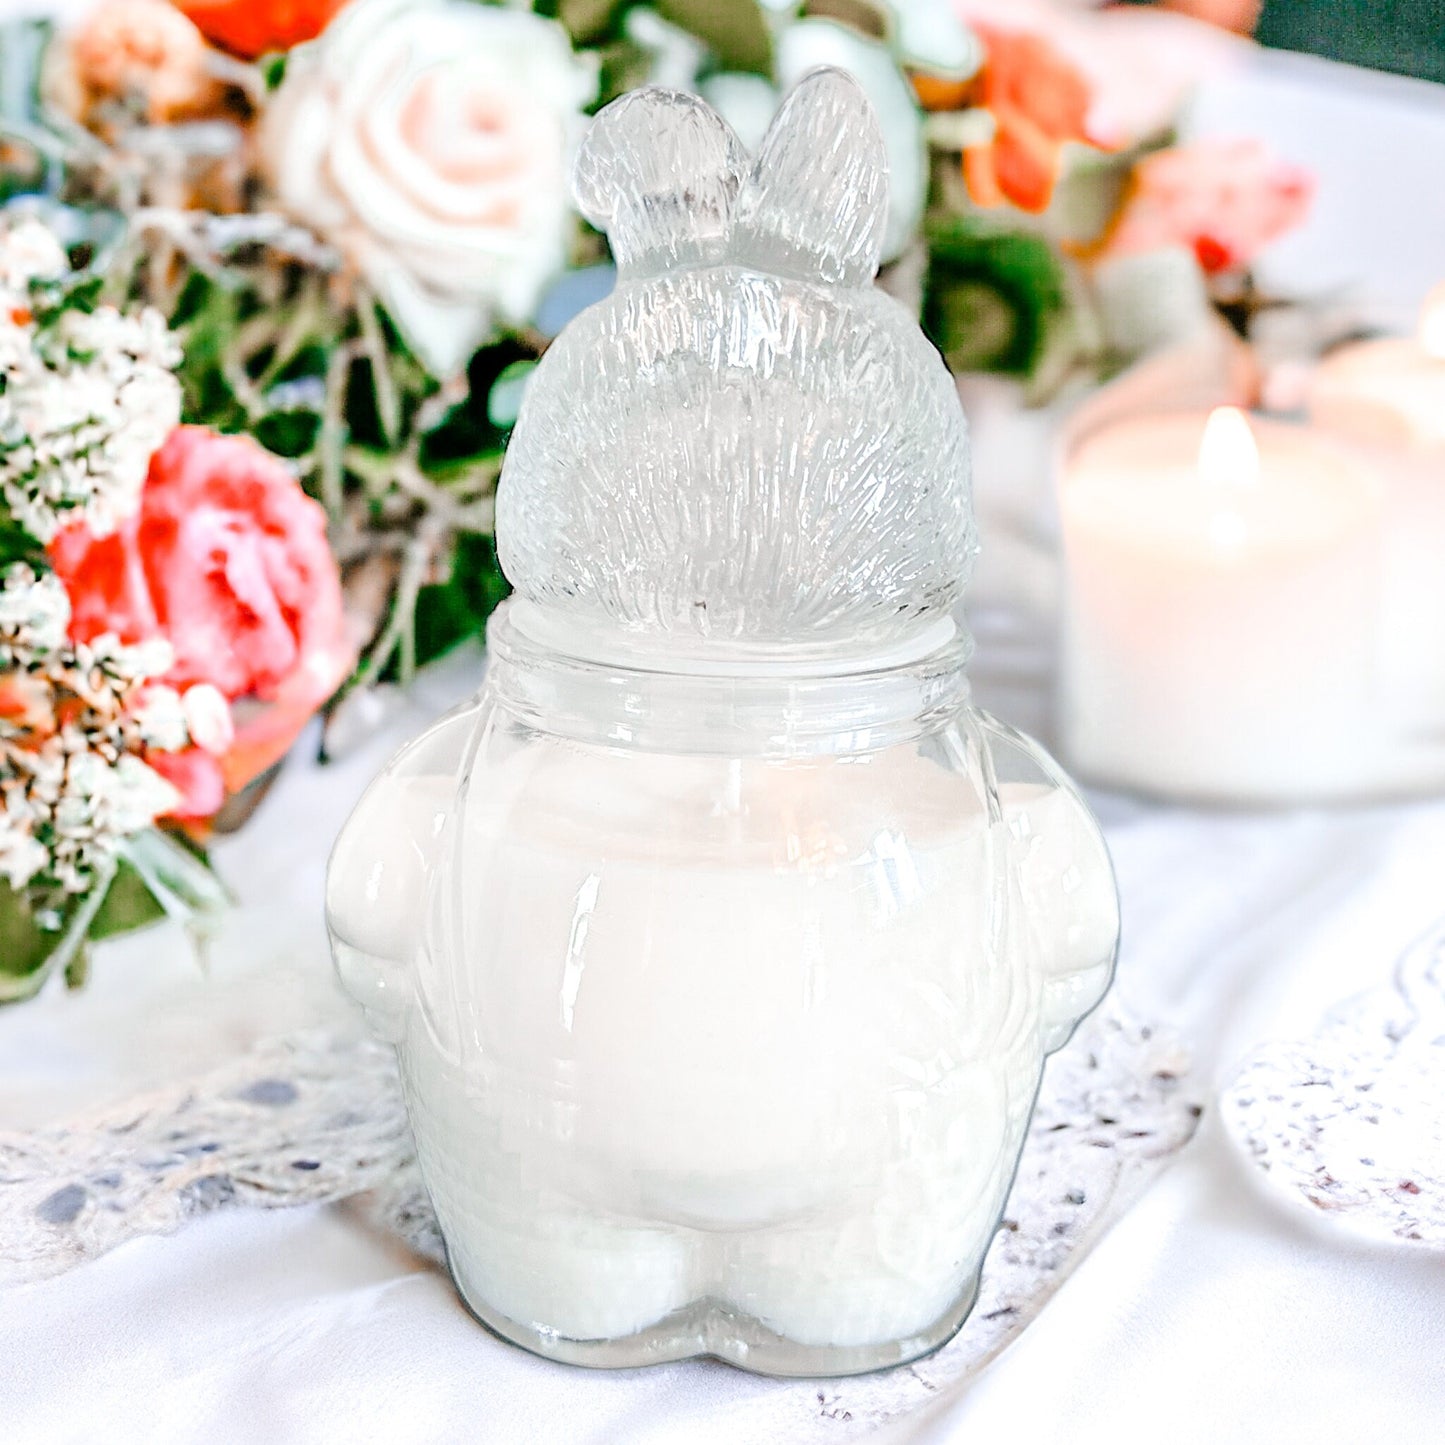 Soy Candle, Vintage Glass, Best Friend Gifts, Farmhouse Decor